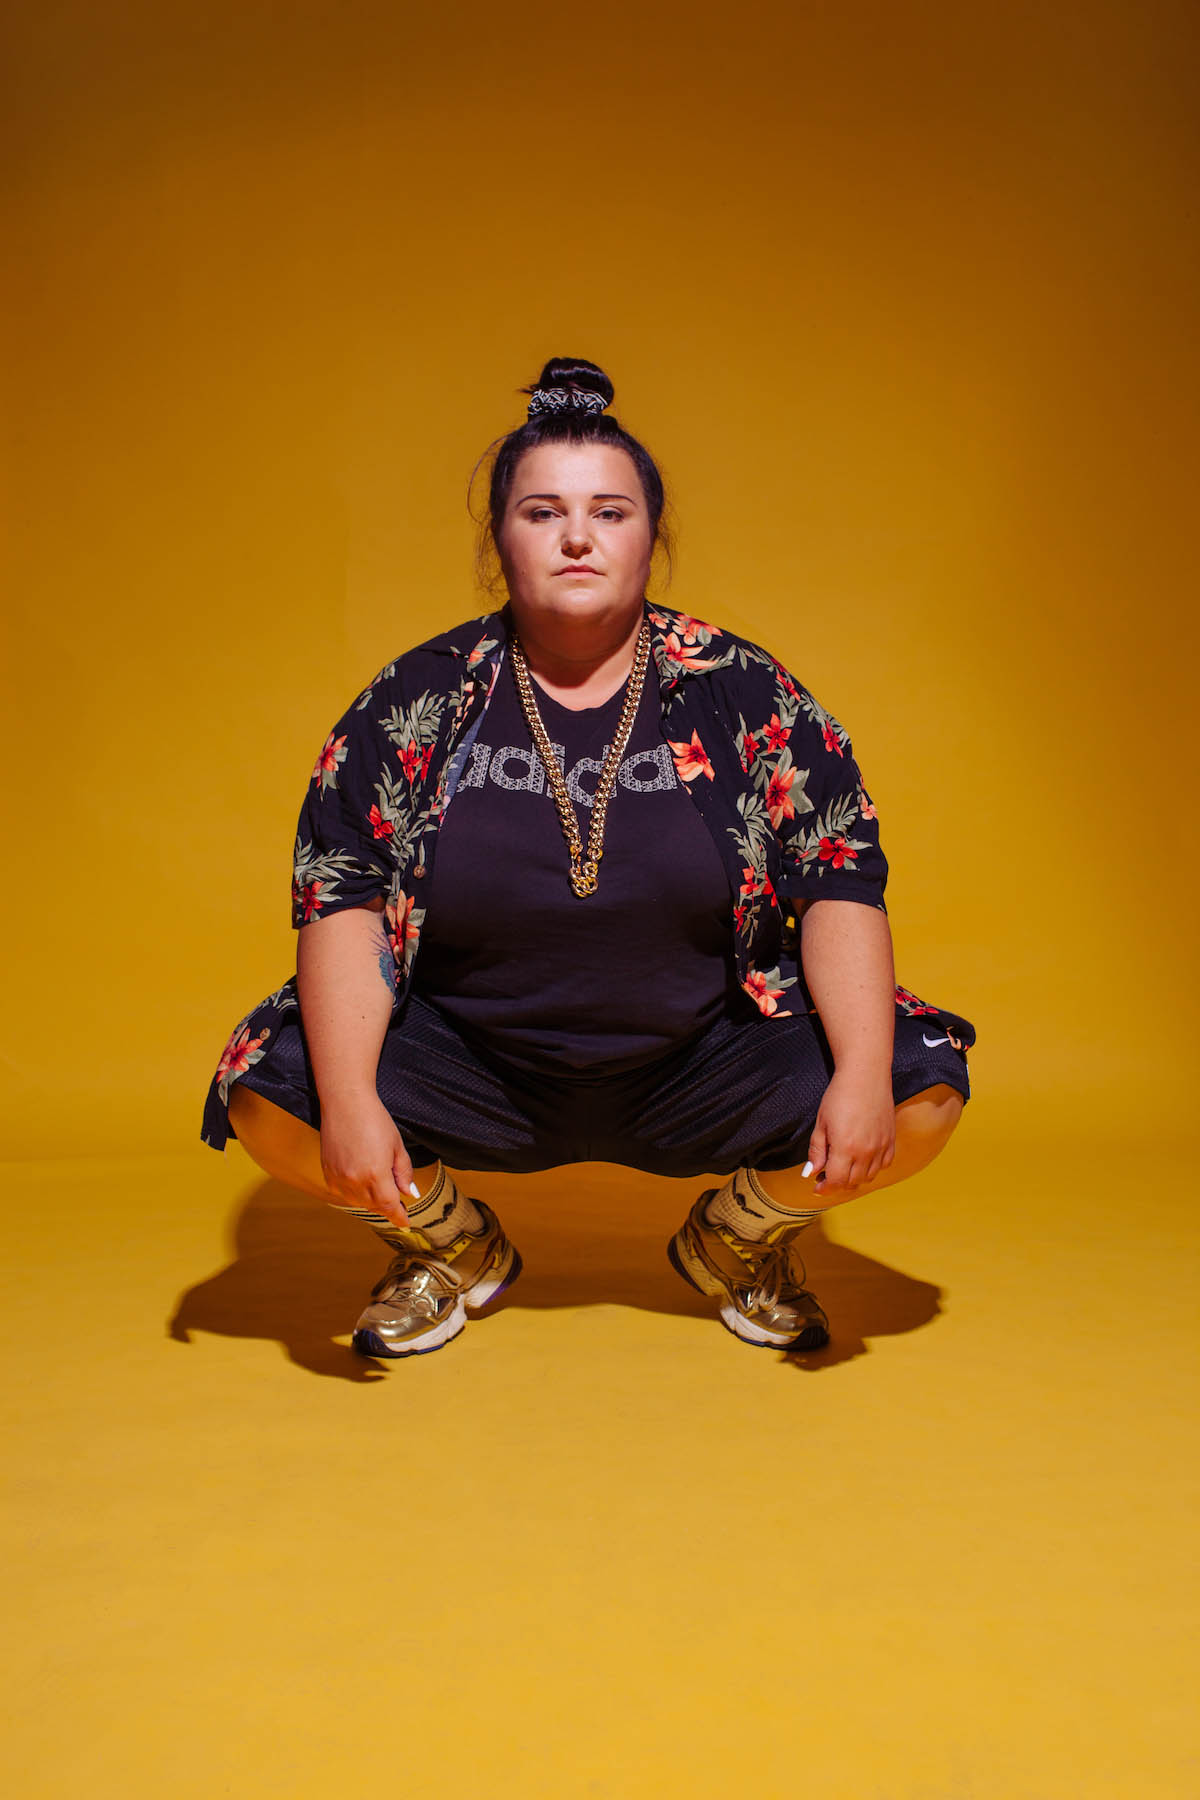 White, female person can be seen from the front in a squatting position. She is wearing a black T-shirt with Adidas written on it, a heavy gold chain that reaches her belly. Over the T-shirt she is wearing a black shirt with small red flowers on it, black knee-length trousers, white socks and gold-coloured trainers with white soles. Her hair is tied into a bun at the top of her head.